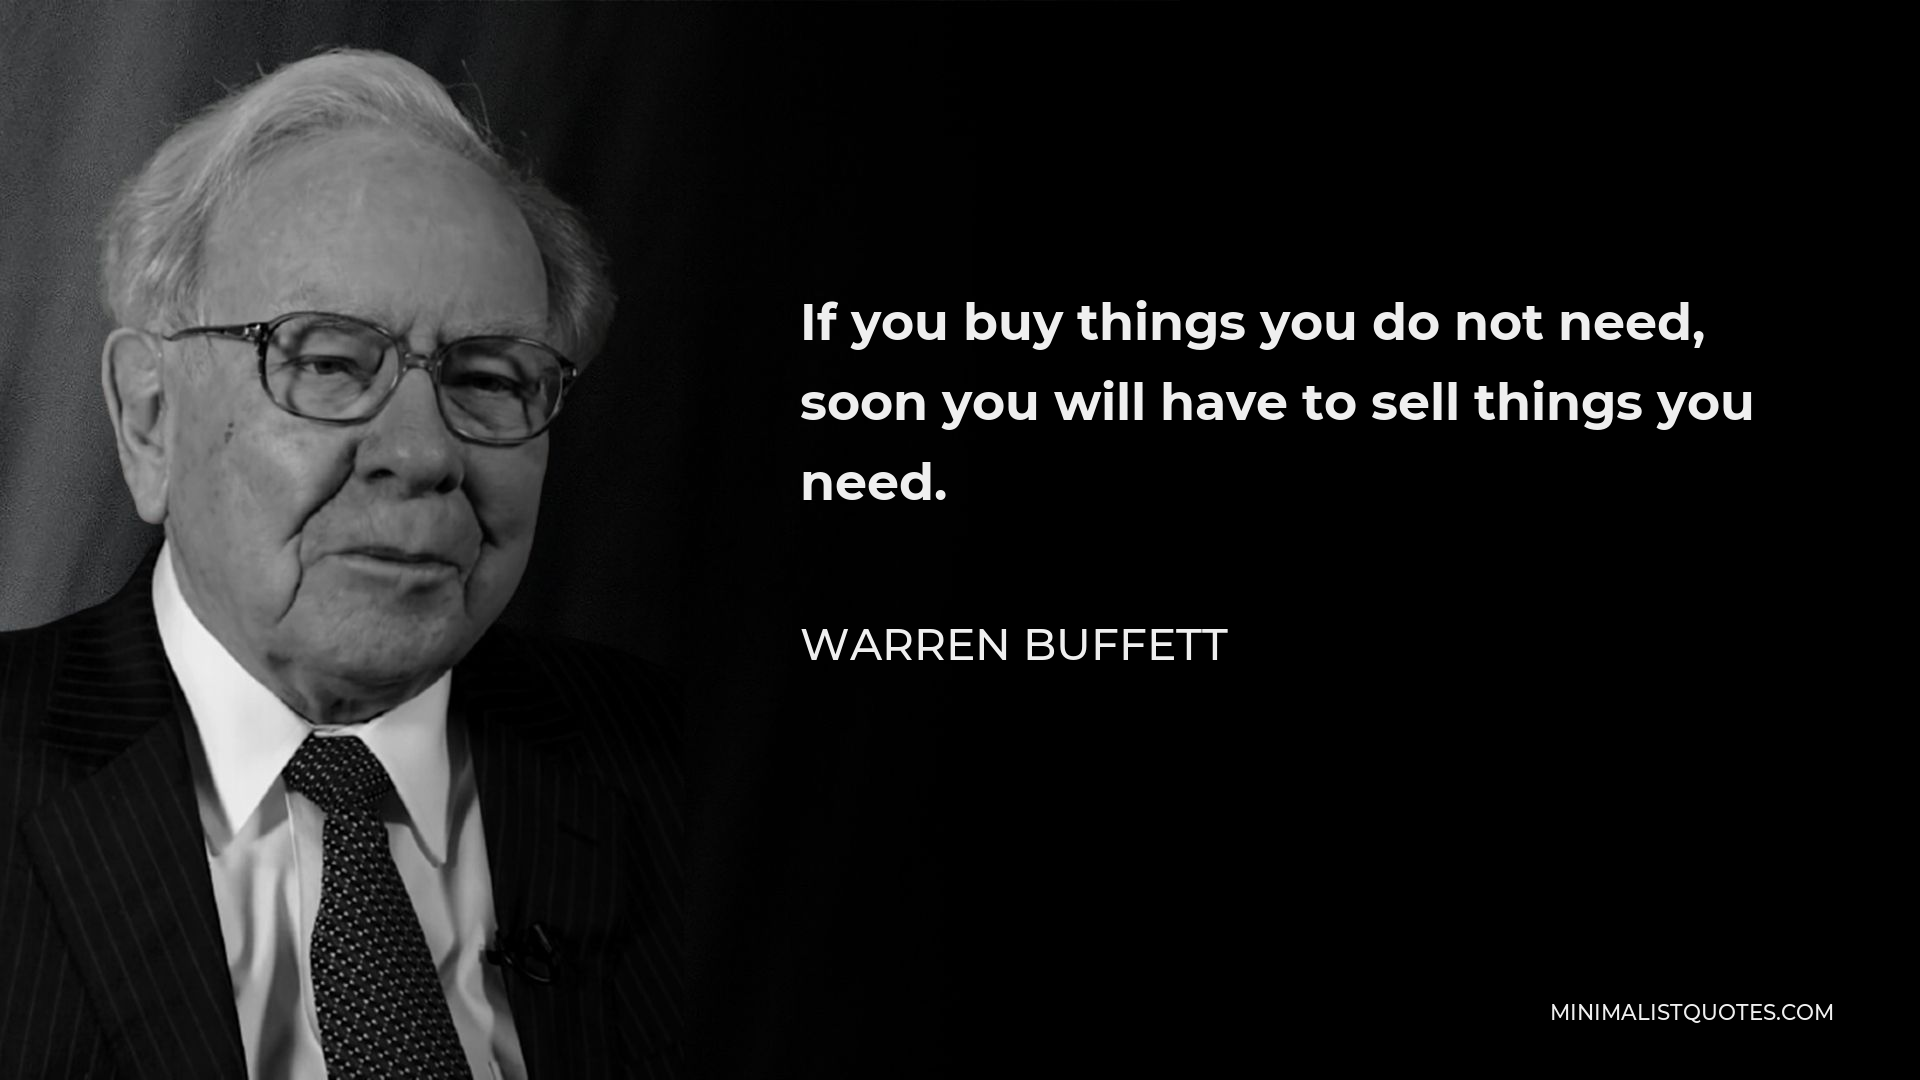 Warren Buffett Quote - If you buy things you do not need, soon you will have to sell things you need.